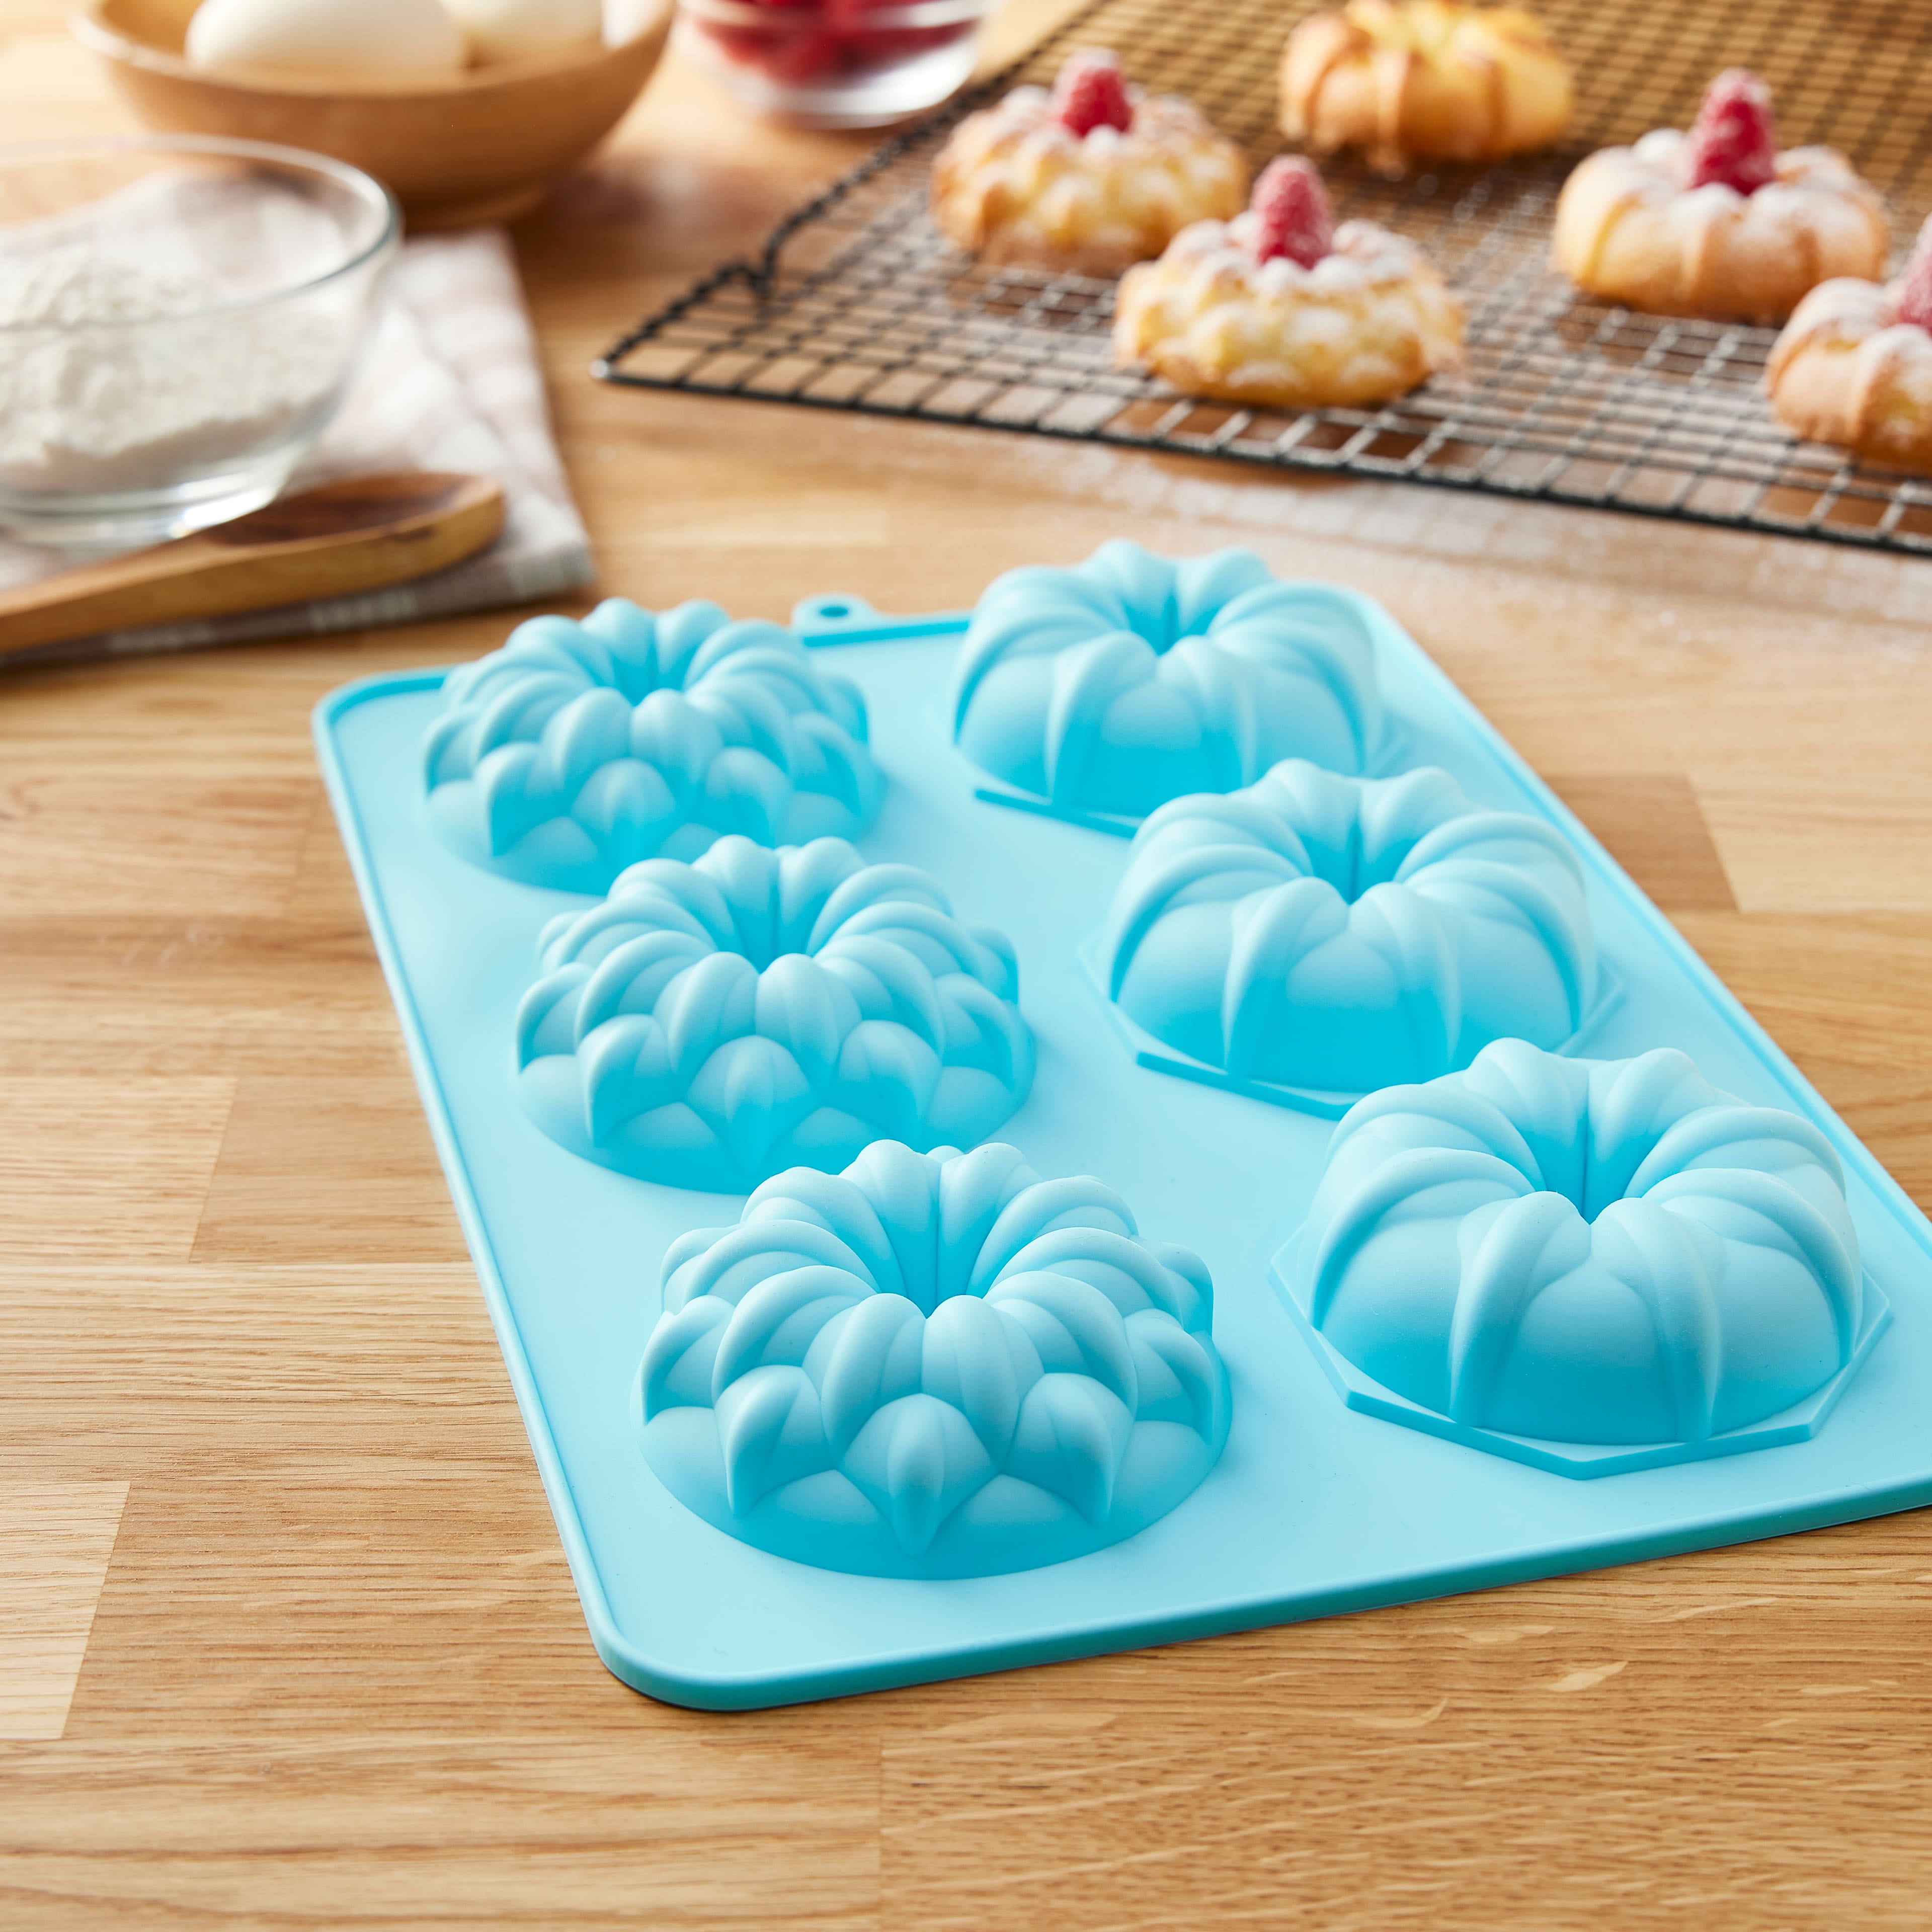 Flat 6-Cavity Silicone Treat Mold by Celebrate It